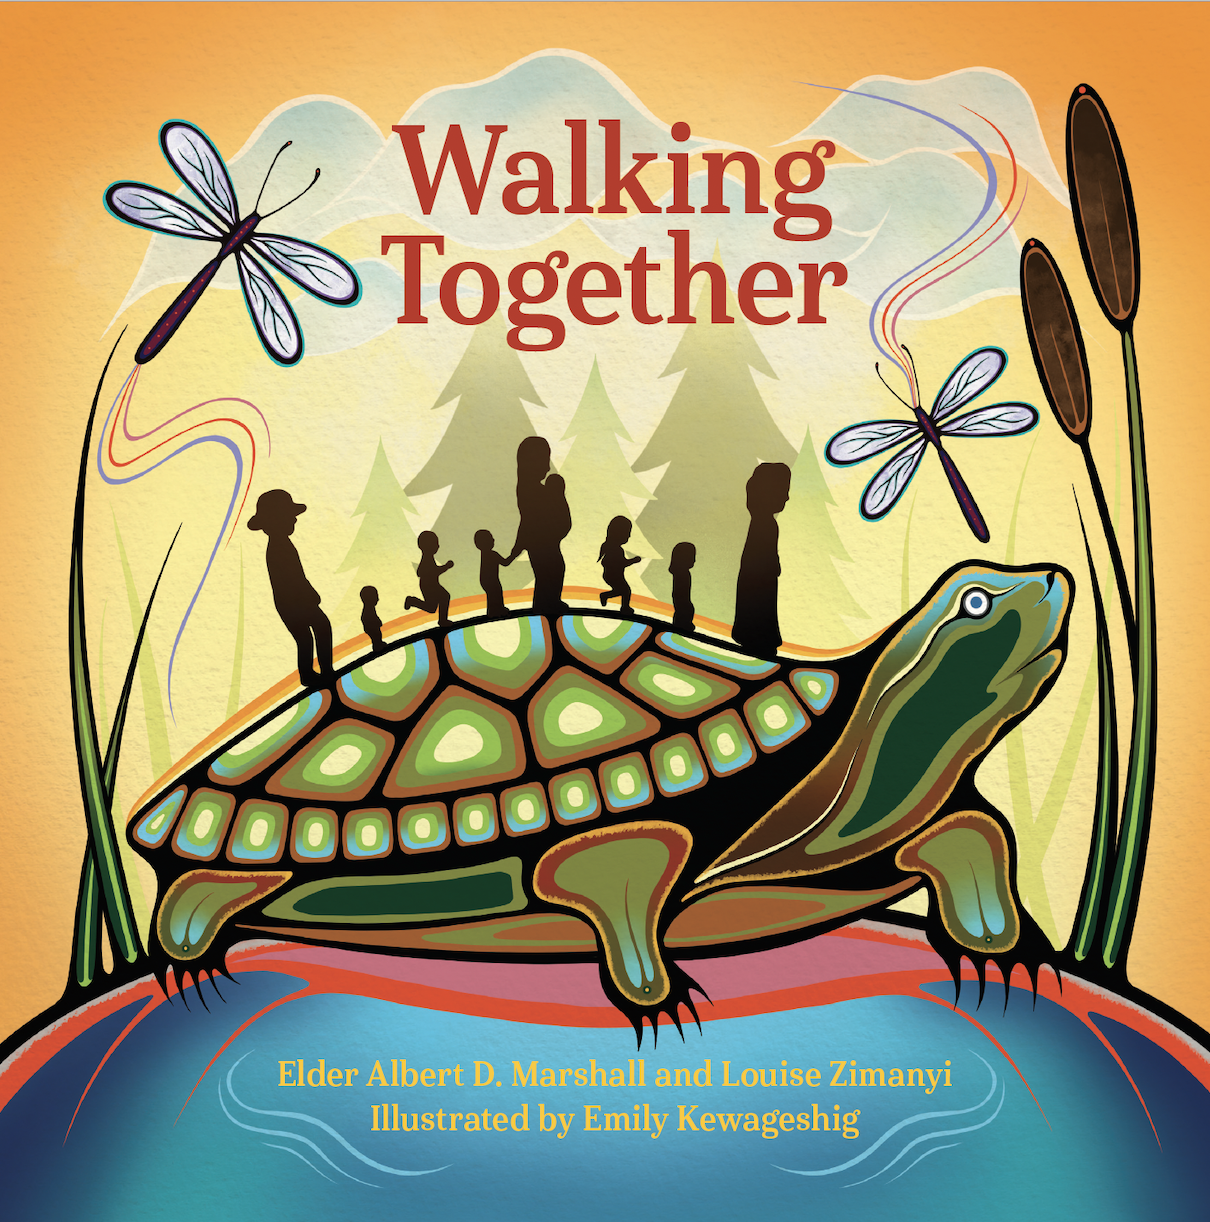 An illustrated book cover with the words Walking Together written on it. There’s a turtle with figures walking on it.